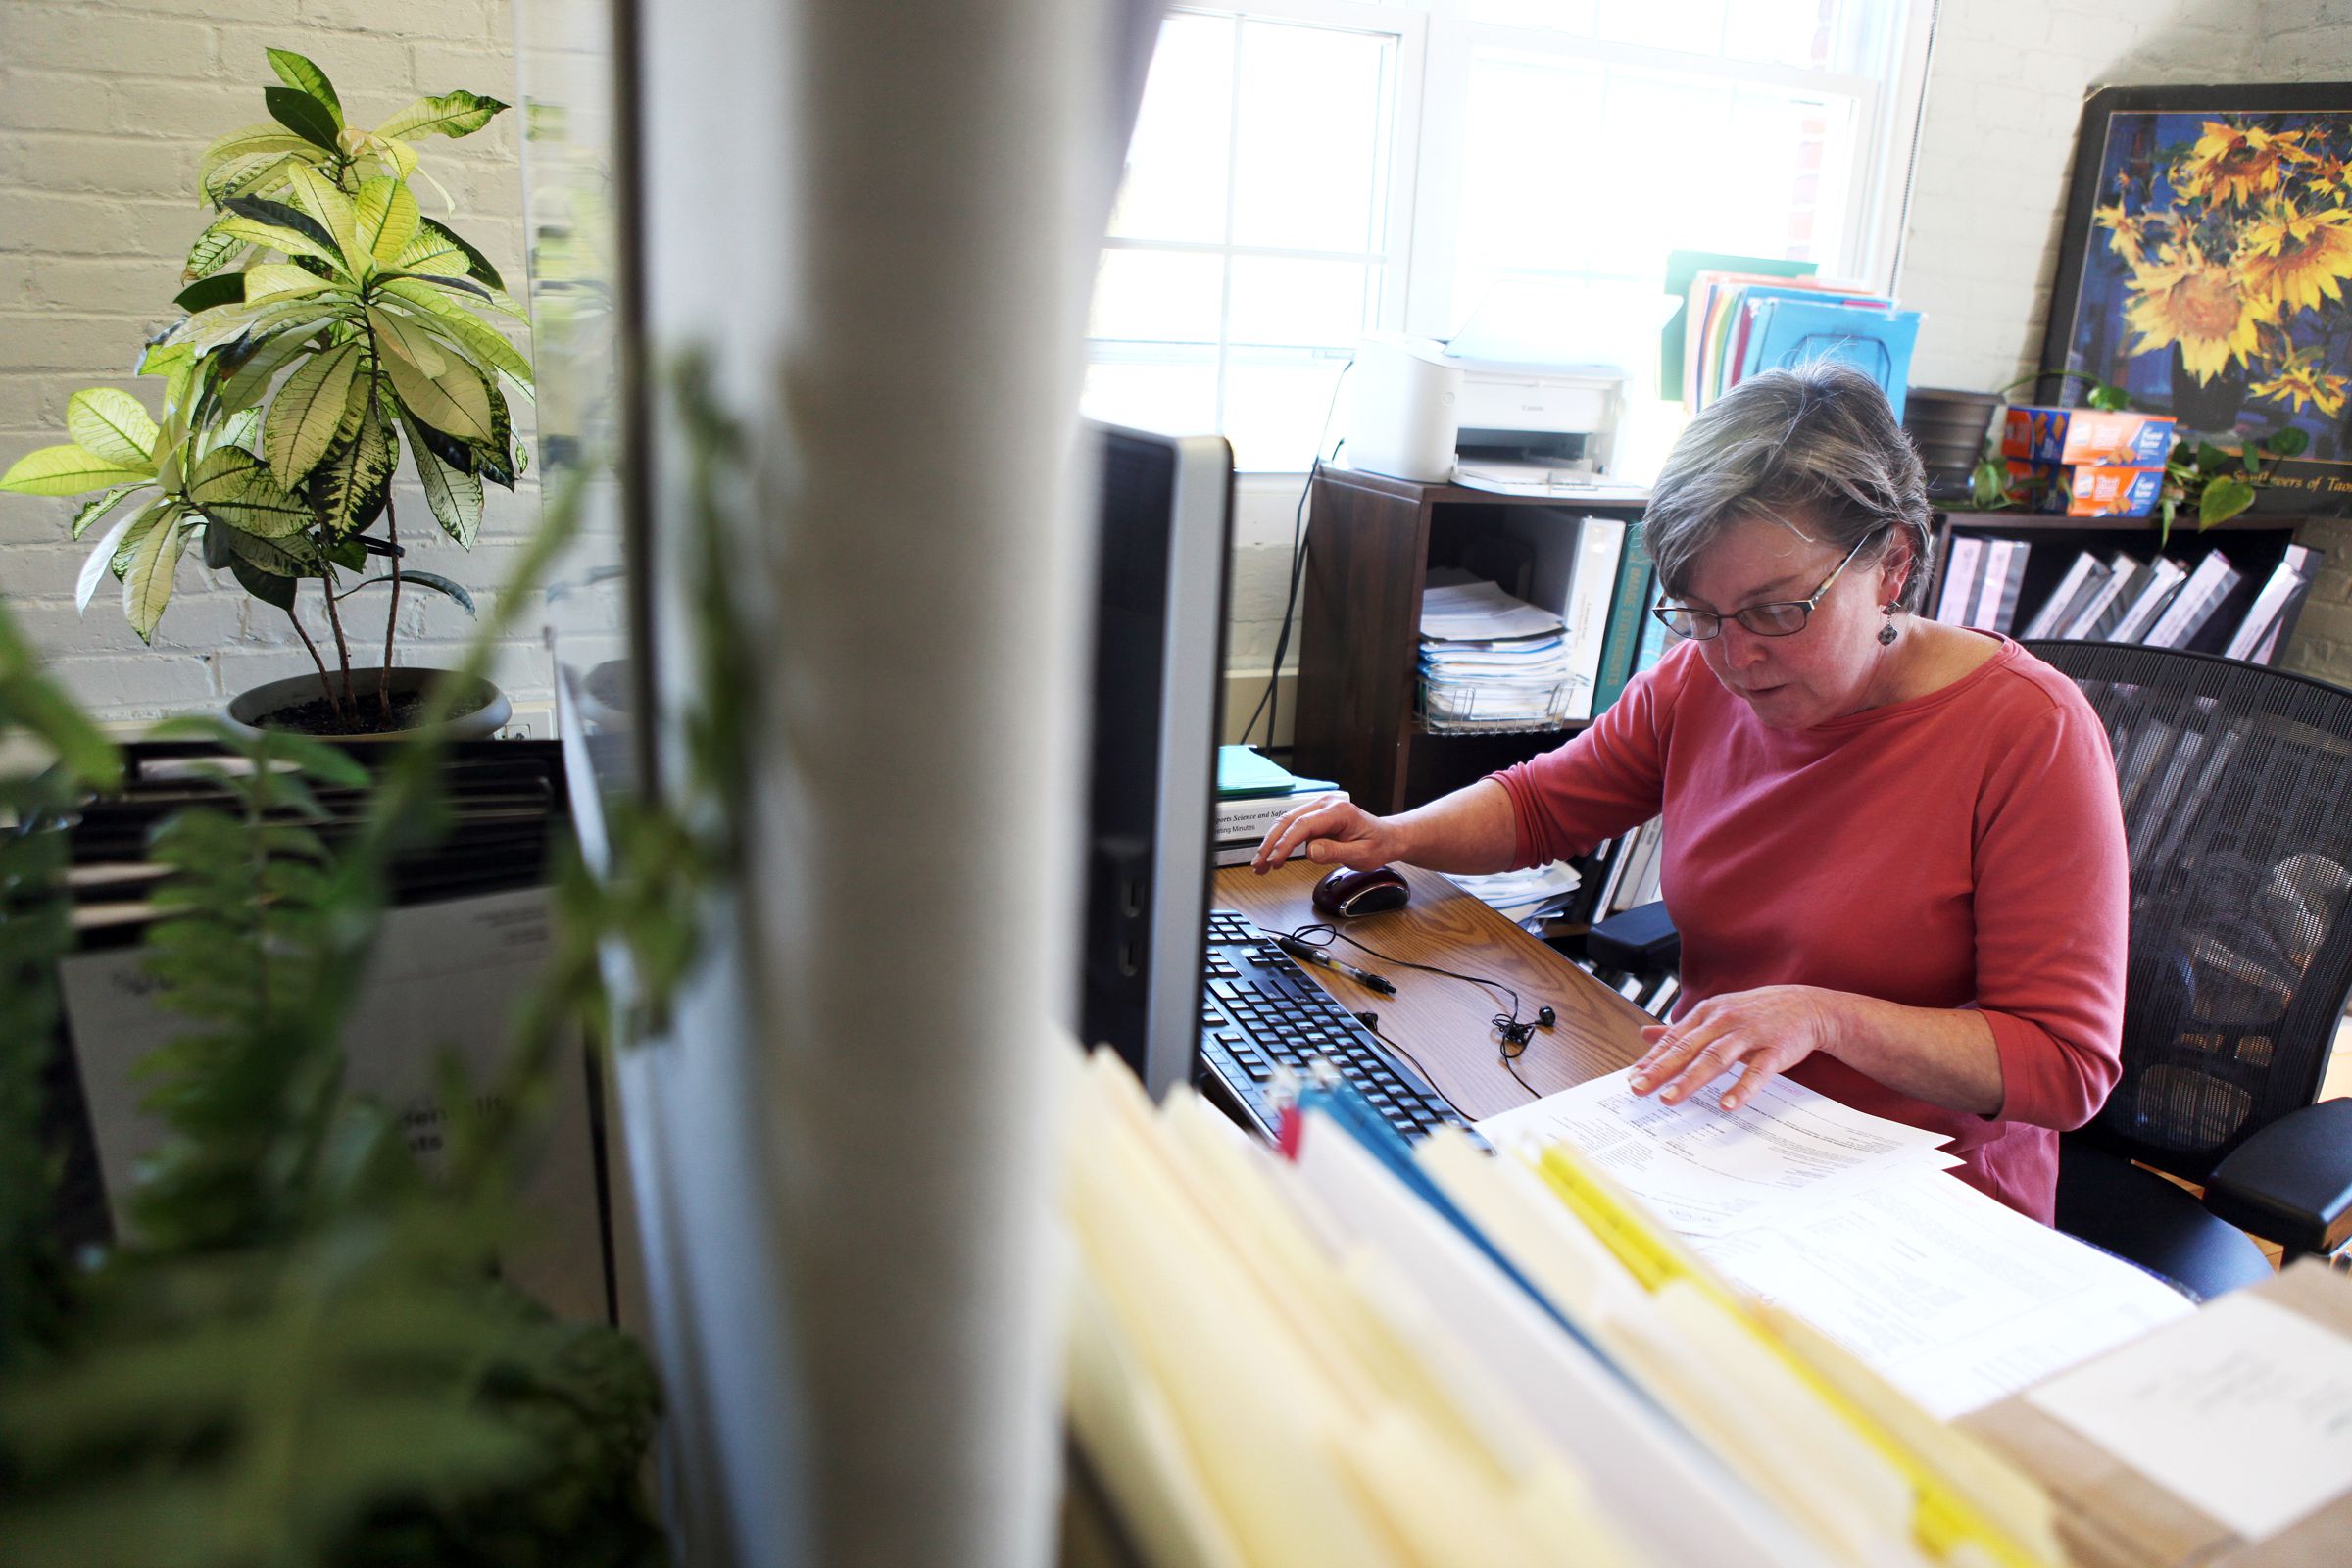 Theresa Hays, business manager at Simbex, works on Thursday, May 11, 2017, in Lebanon, N.H. (Valley News - Jovelle Tamayo) Copyright Valley News. May not be reprinted or used online without permission. Send requests to permission@vnews.com.